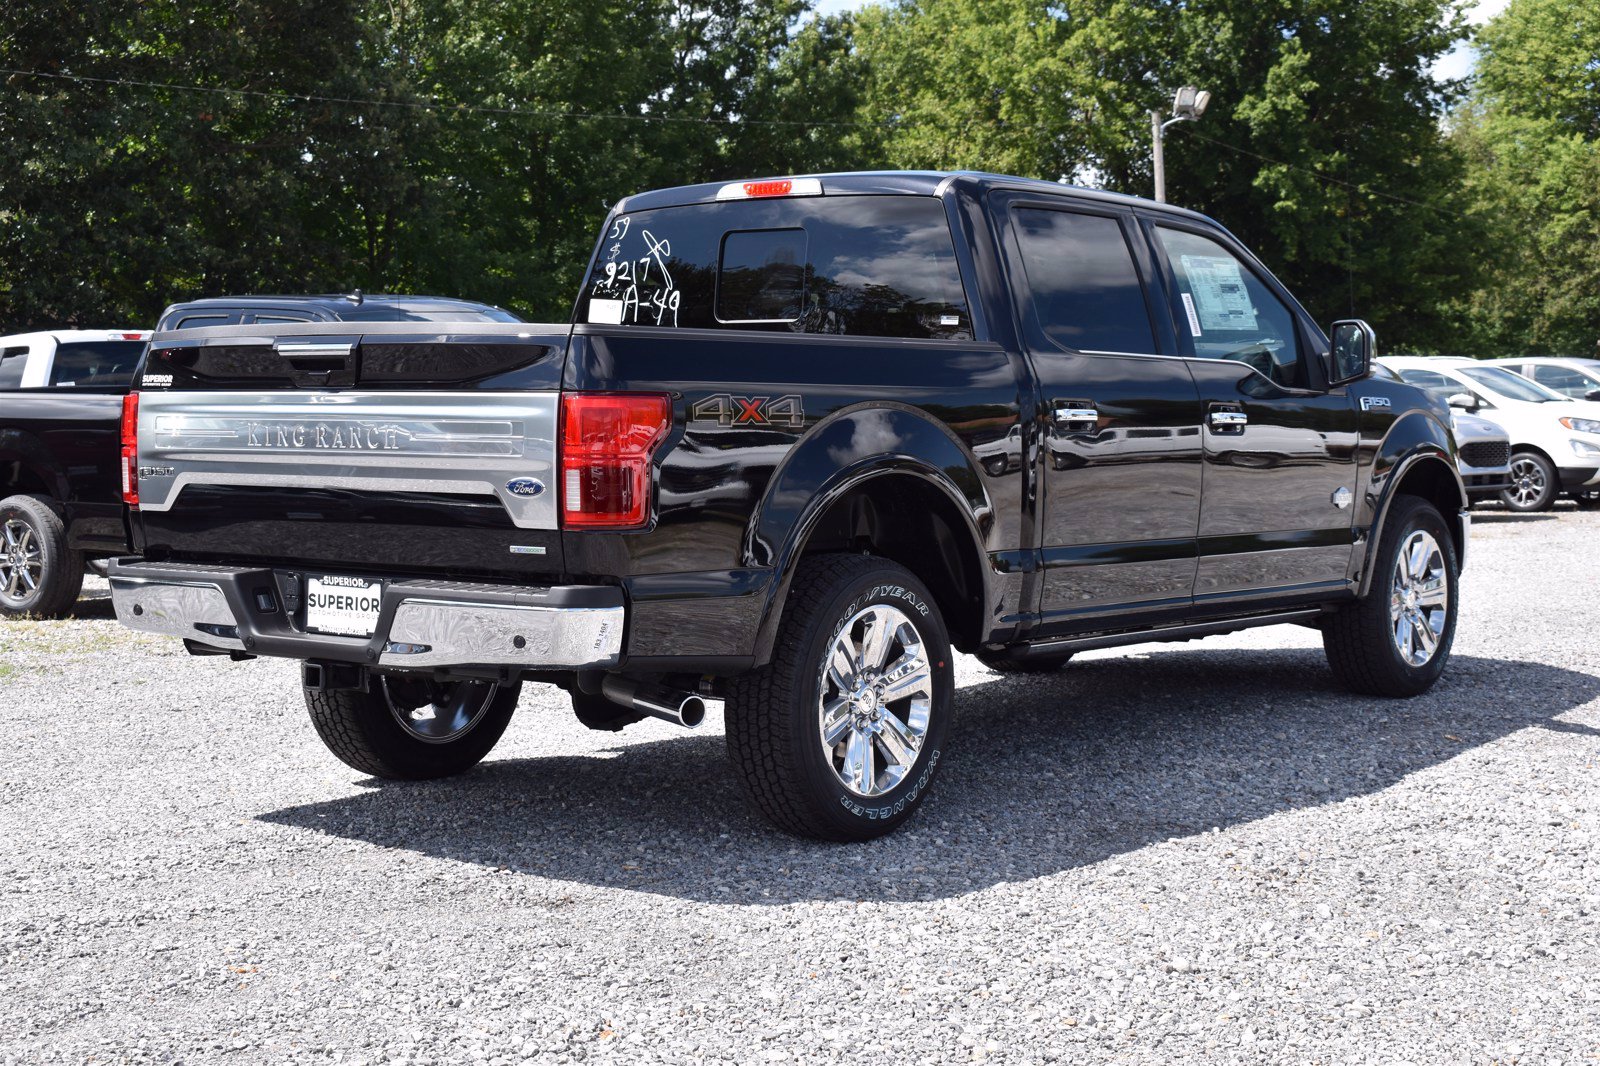 New 2020 Ford F-150 King Ranch 4WD Crew Cab Crew Cab Pickup in